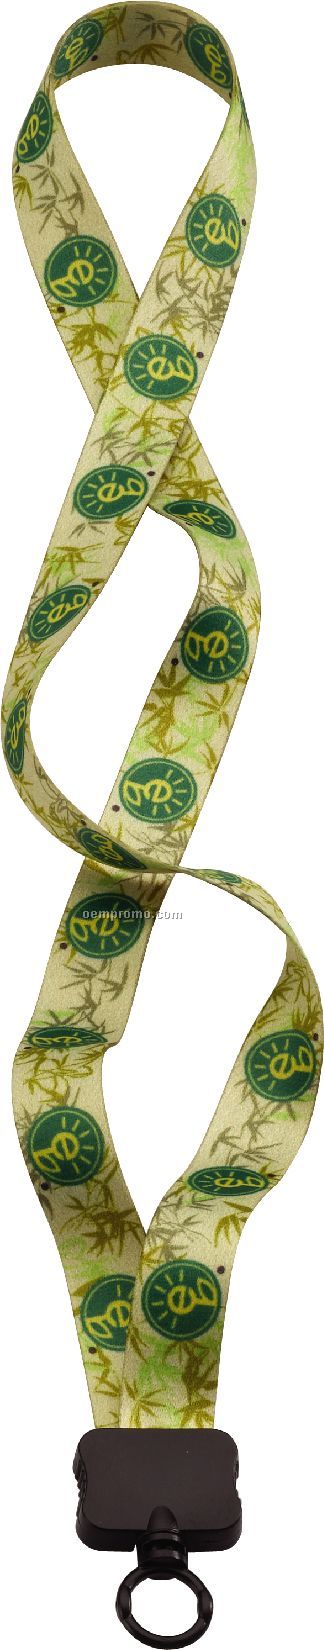 3/4" Rpet Dye Sublimated Lanyard With Plastic Clamshell & O-ring